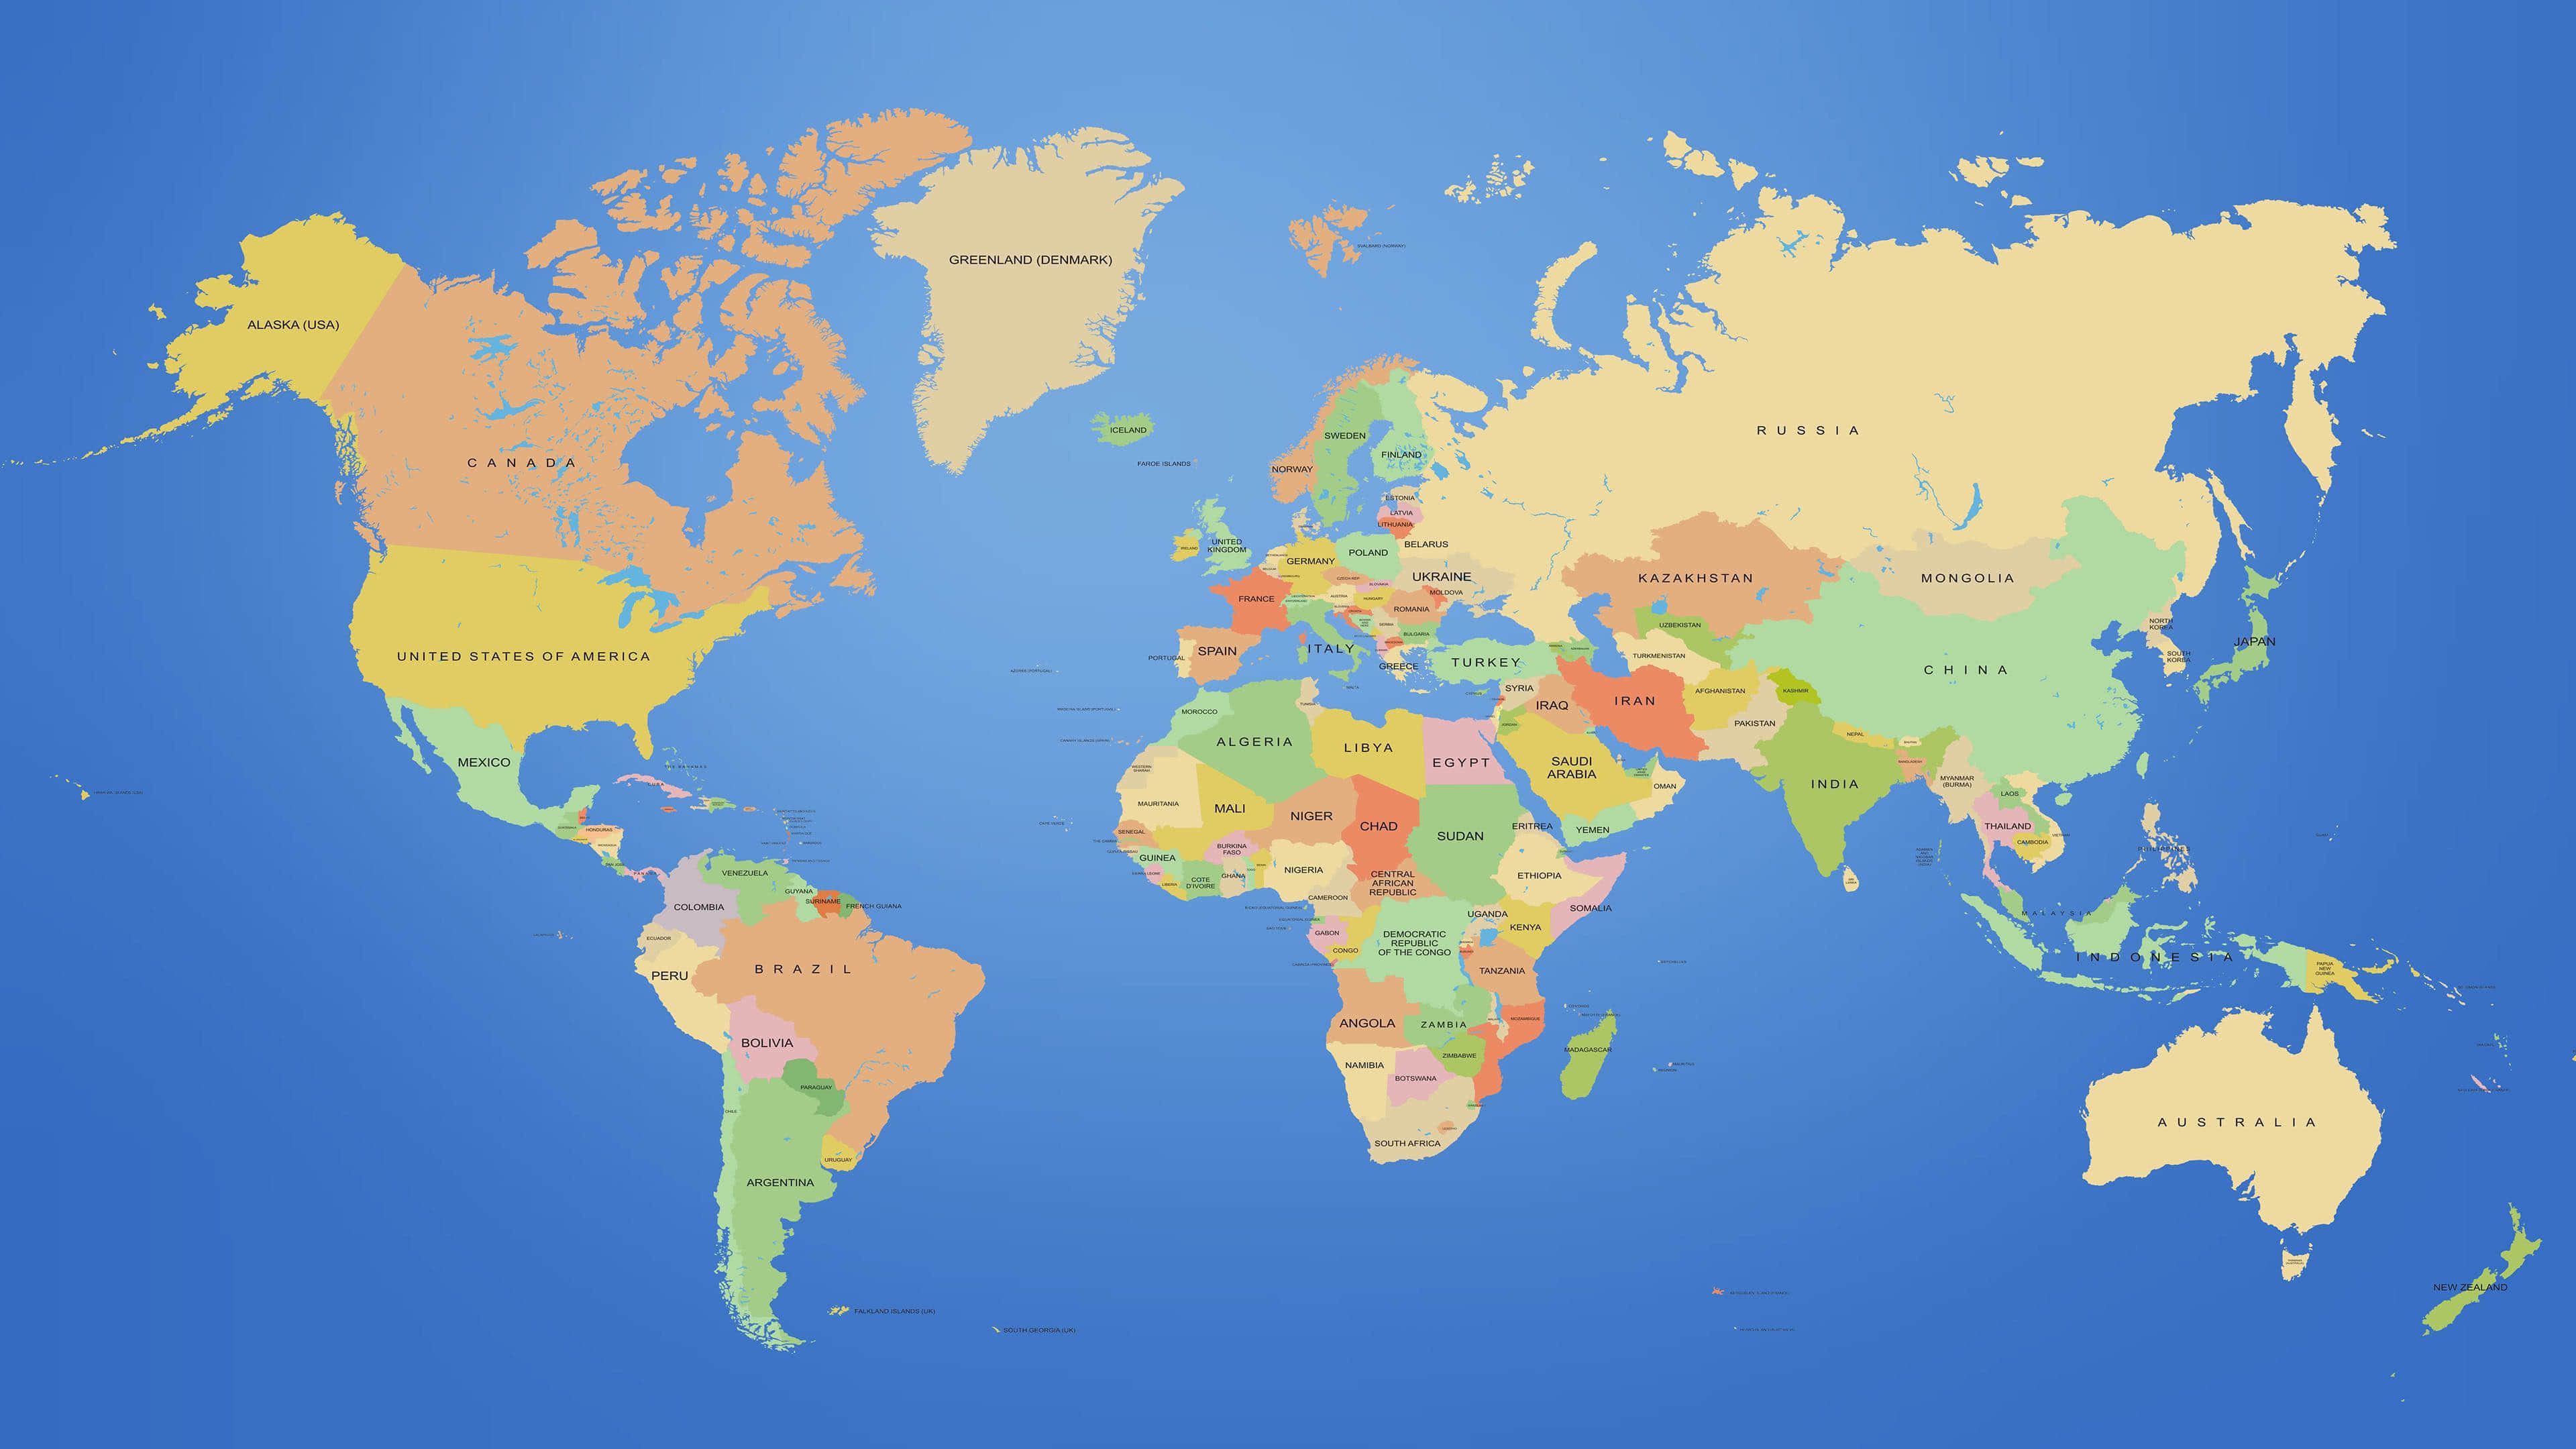 World Maps Hd Wallpapers